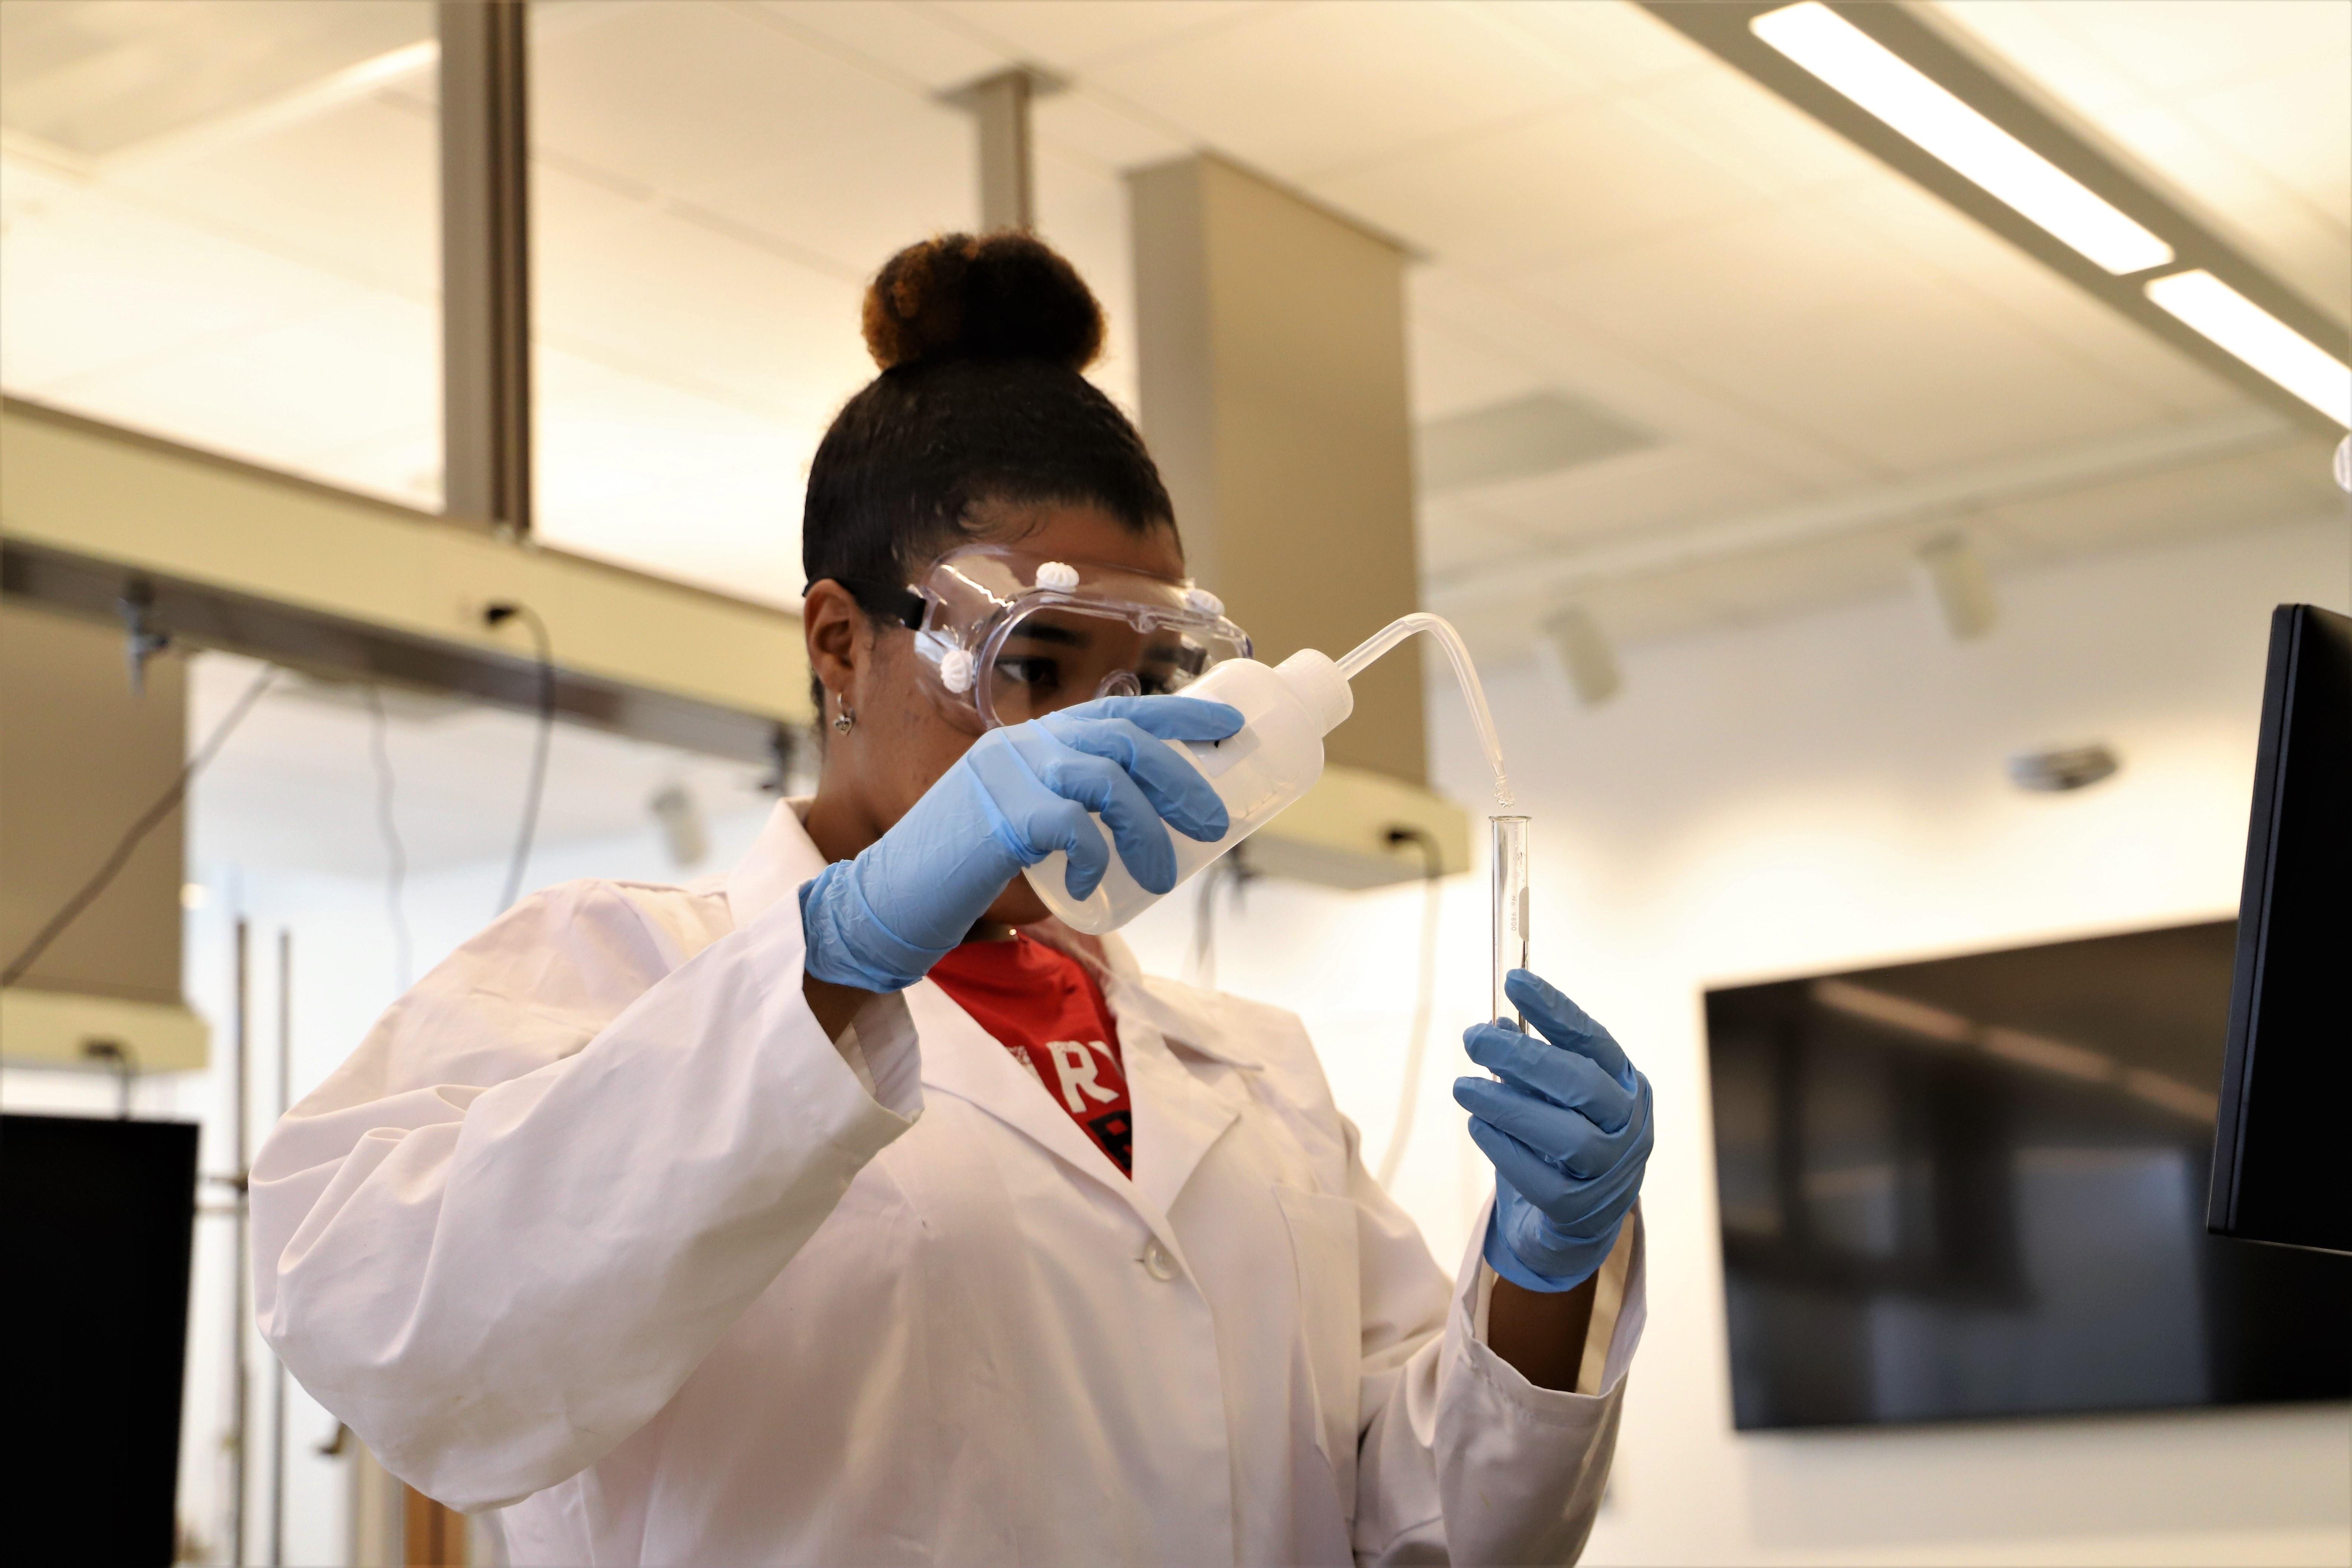 Undergraduate student in lab coat and safety goggles using lab equipment